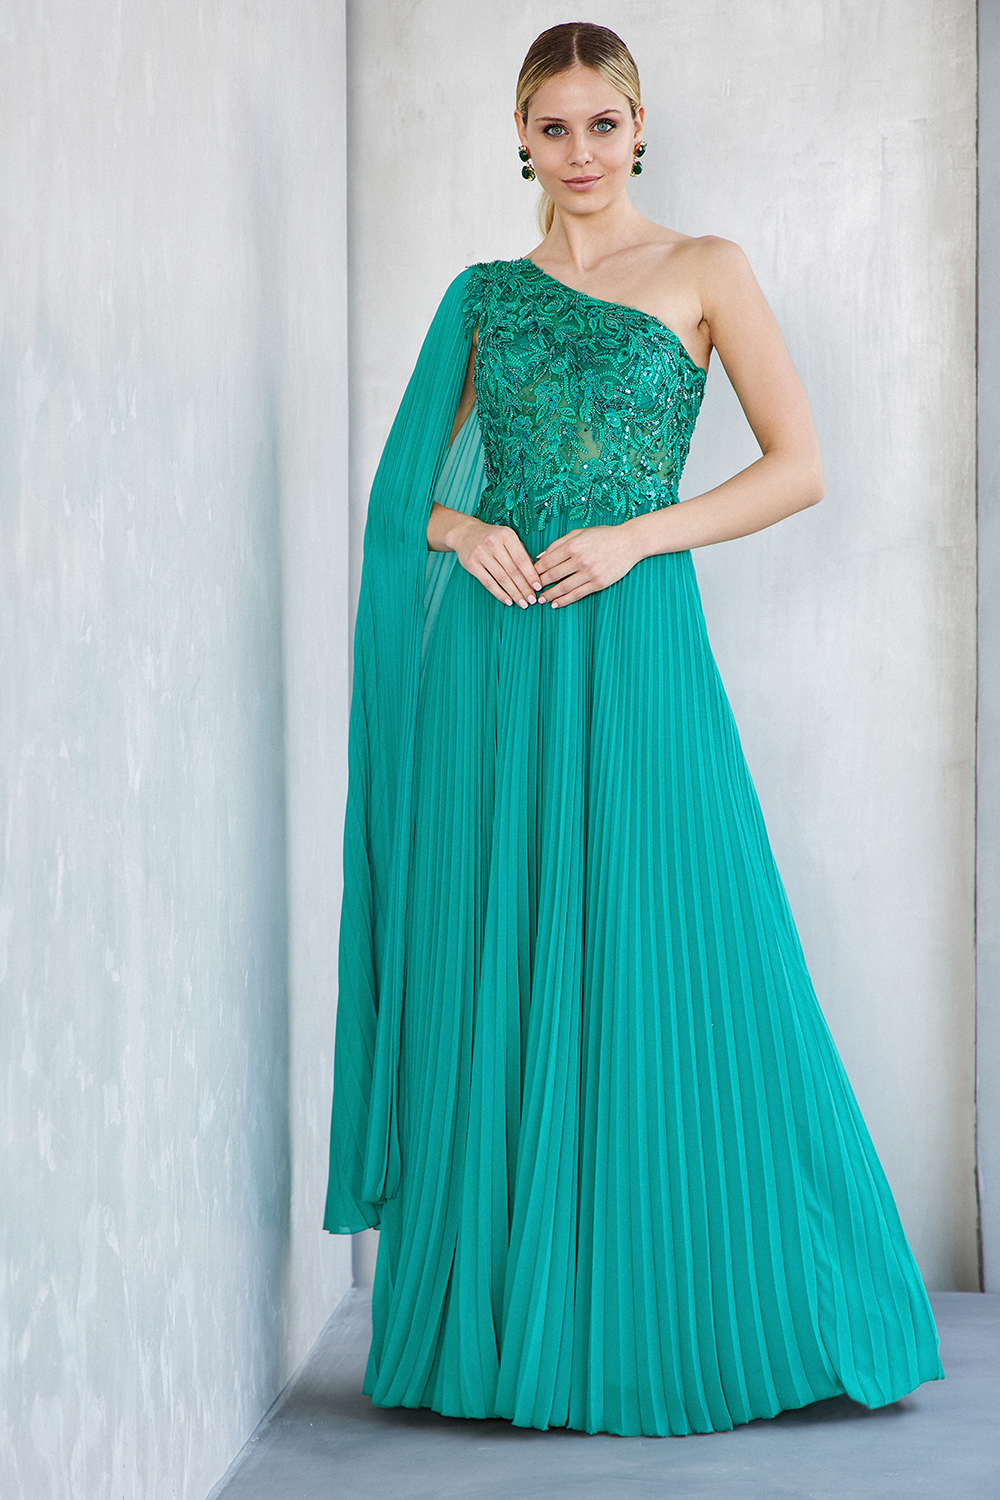 Long evening pleated dress, beaded top with one pleated long sleeve